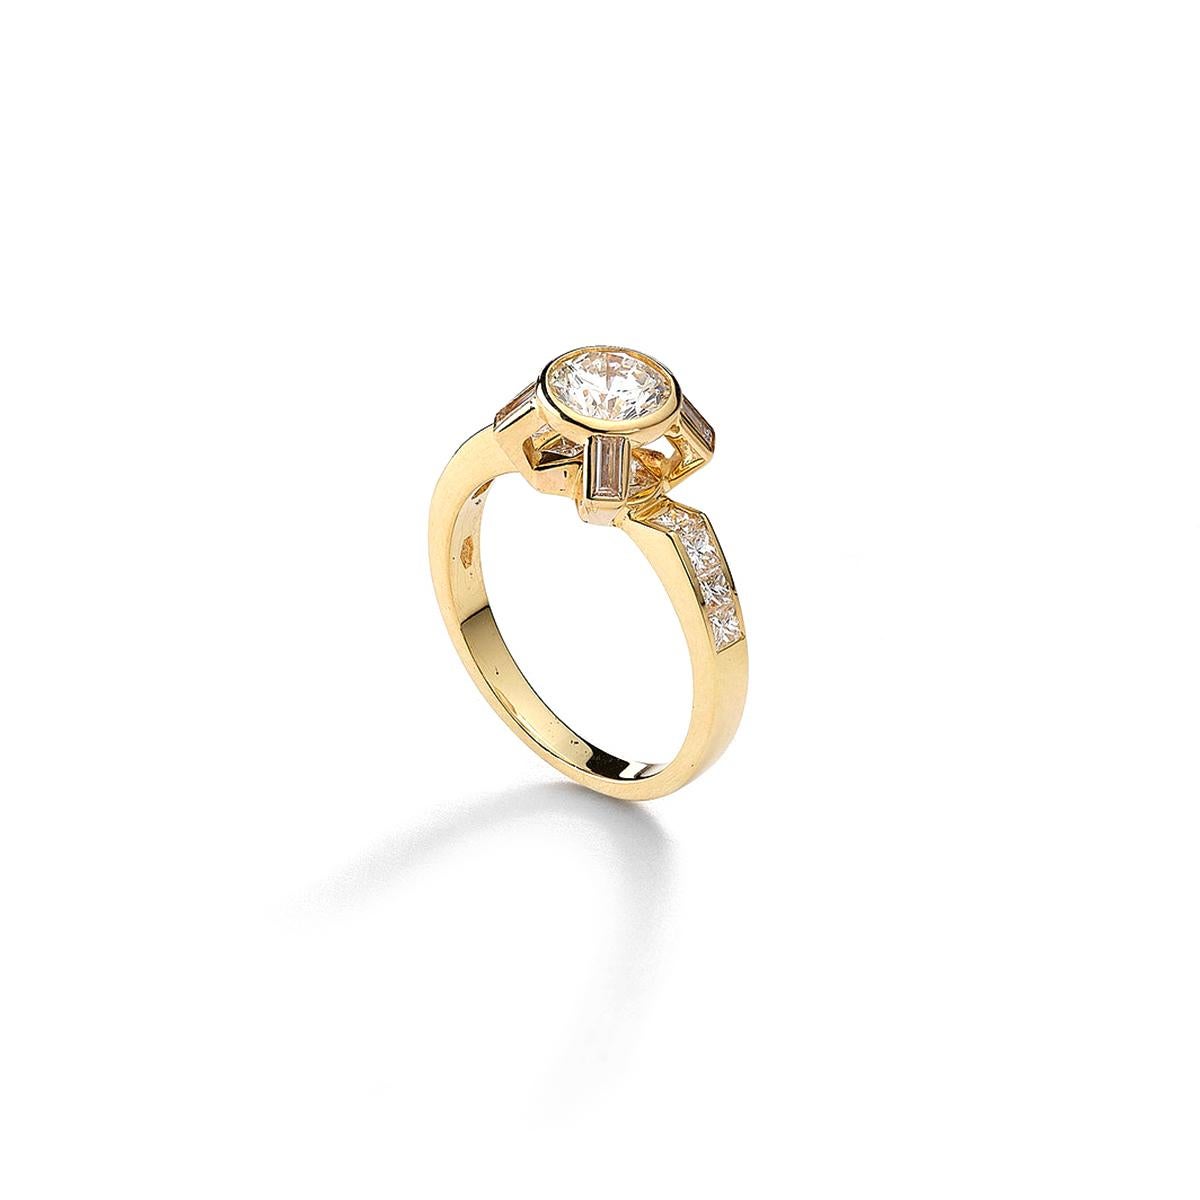 Ring in 18kt yellow gold set with one diamond 0.83 cts, 4 baguette cut diamonds 0.22 cts and 10 square diamonds 0.51 cts Size 53            